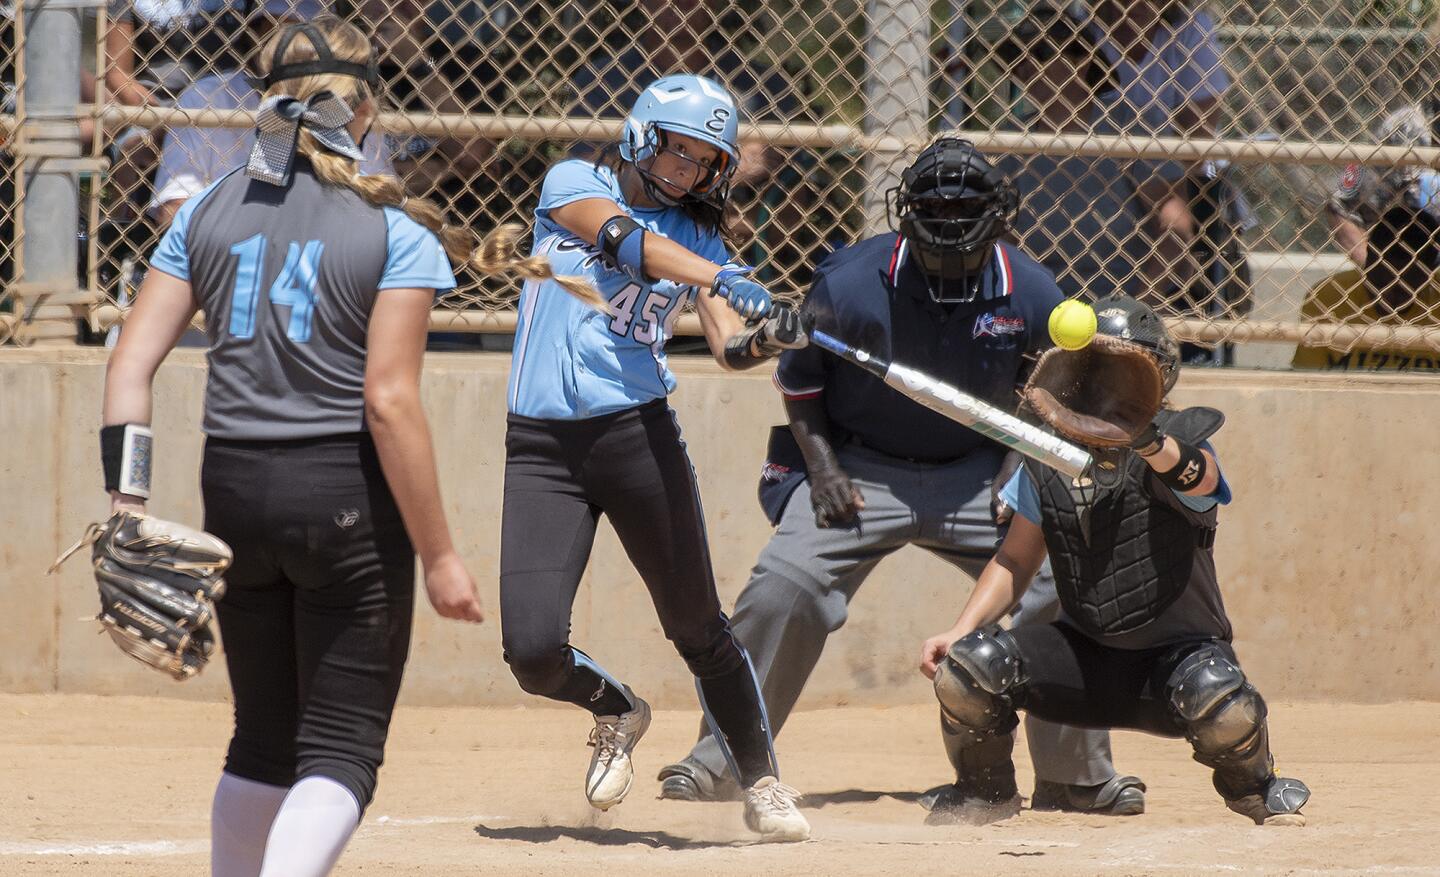 Explosion Denio's Serena Starks hits a double in the third inning off of Tennessee Fury's Ashley Rogers during an 18u game in the Premier Girls Fastpitch Nationals at Huntington Beach Sports Complex on Tuesday, July 24.